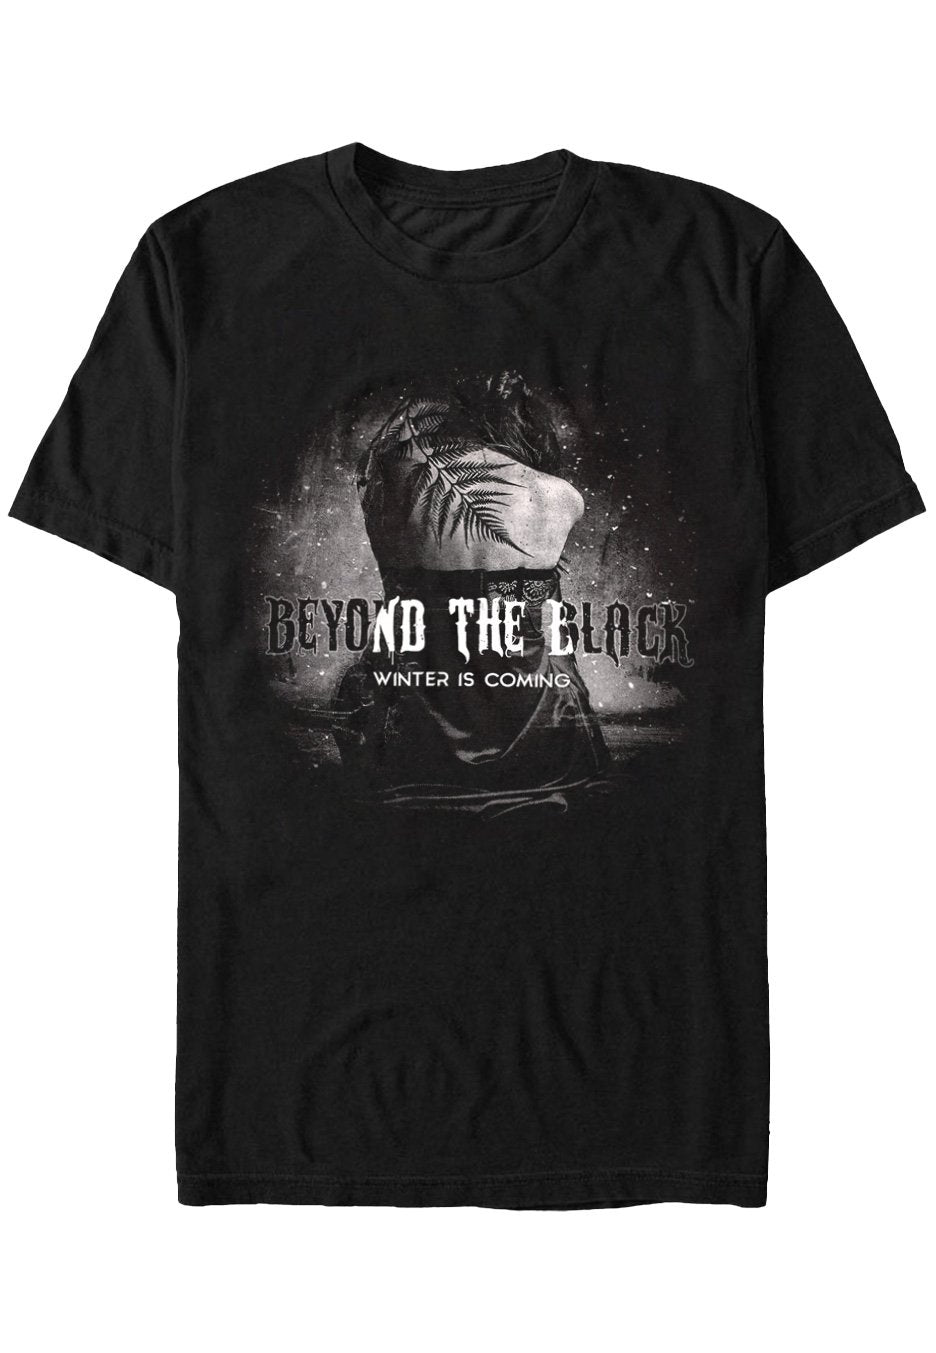 Beyond The Black - Winter Is Coming - T-Shirt